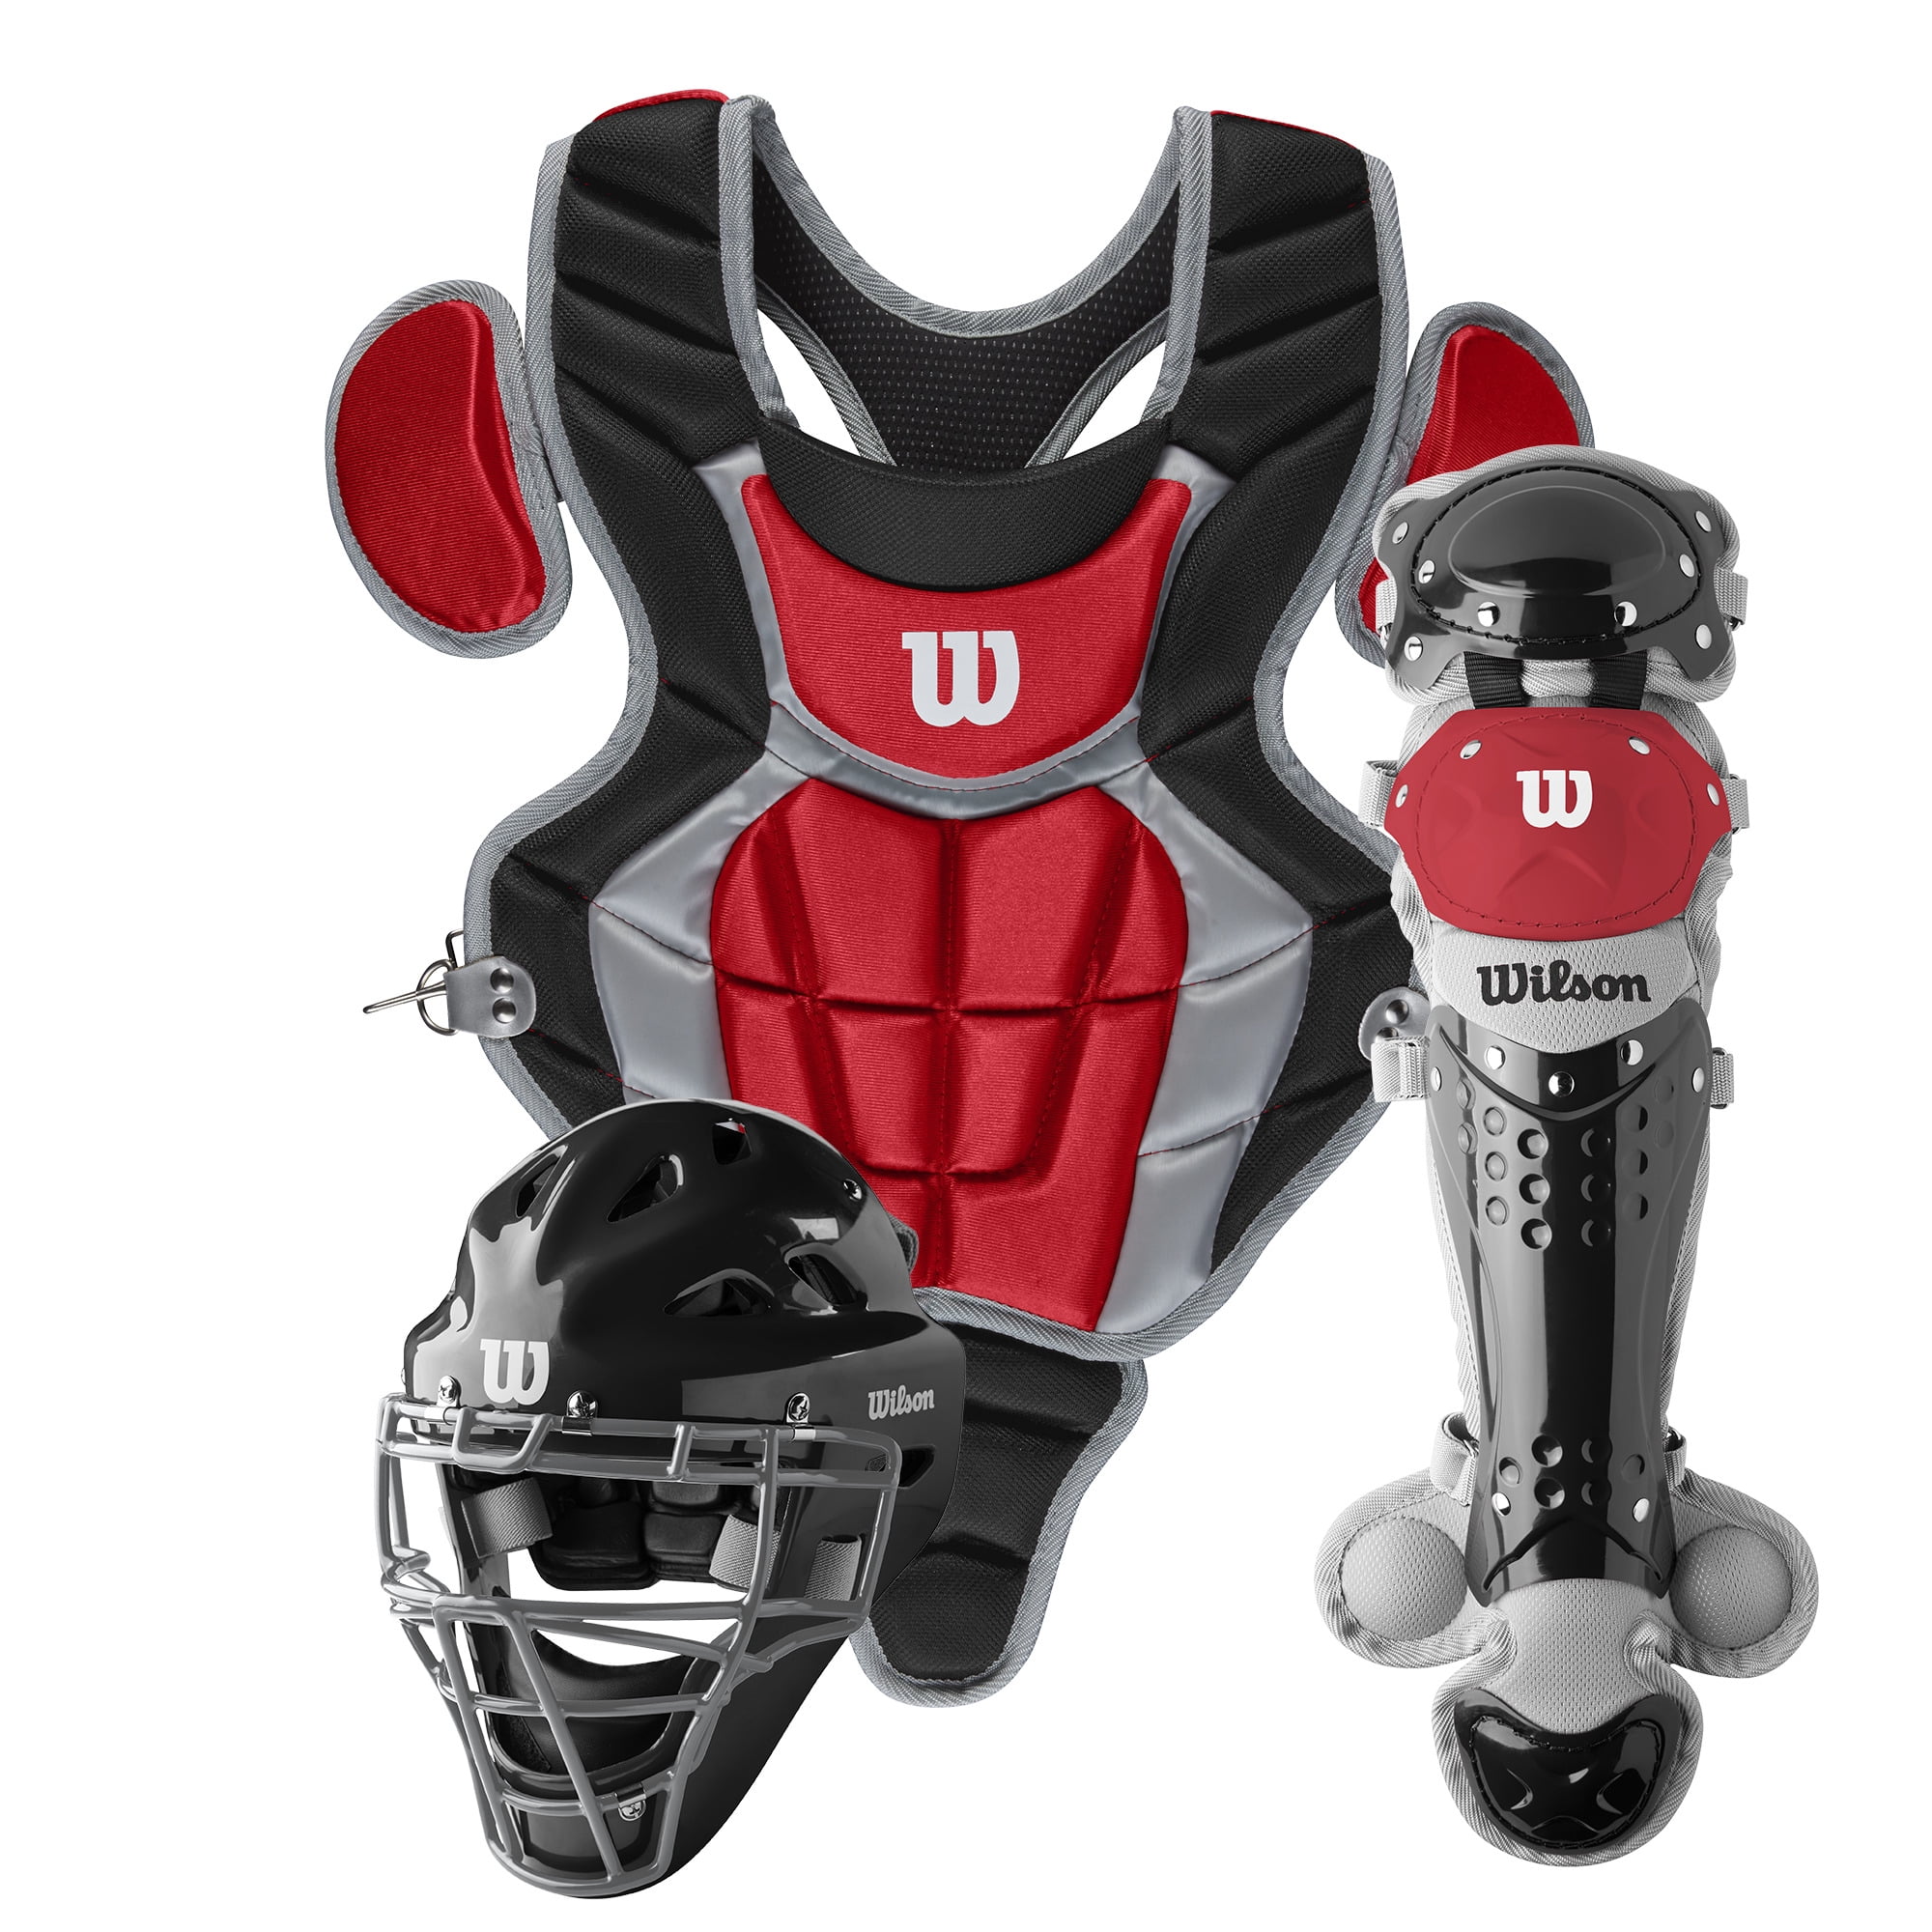 Wilson C200 Youth Catchers Gear Kit, Black and Scarlet Red